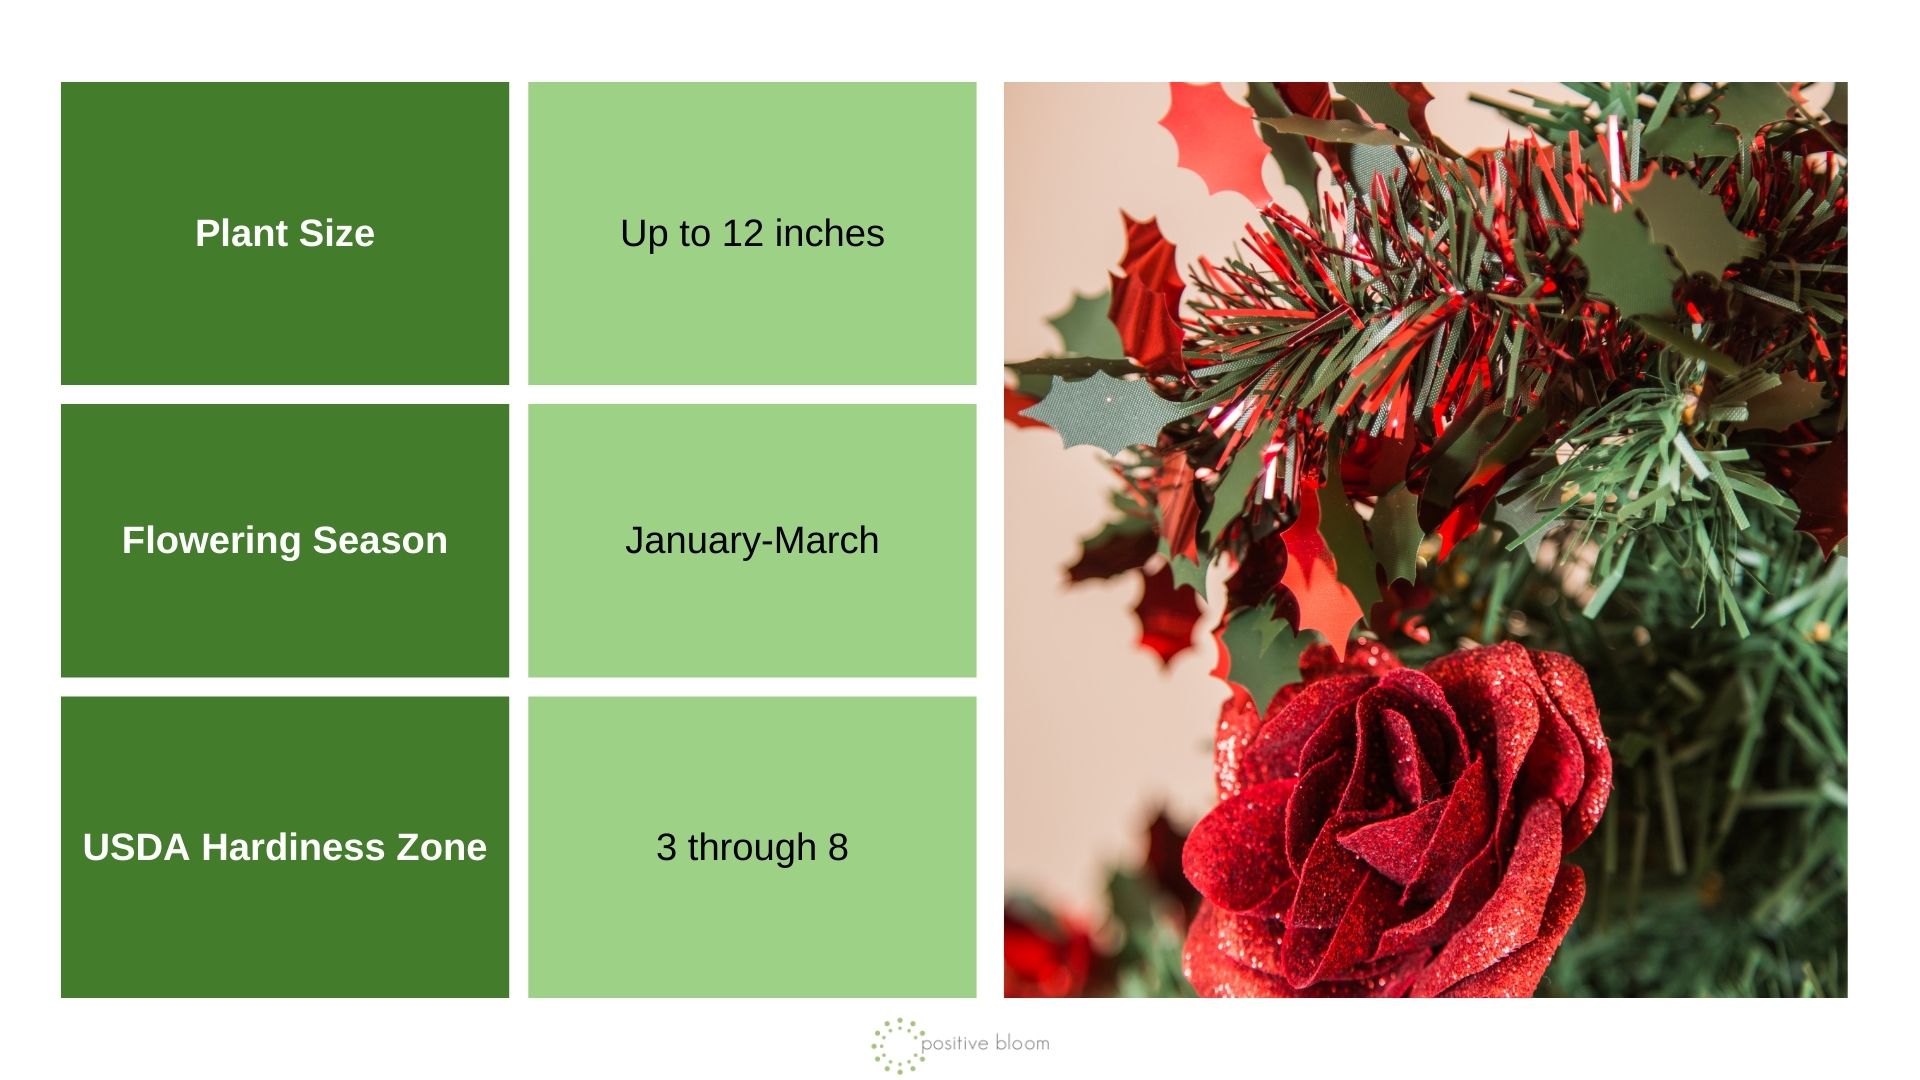 Christmas Rose info chart and photo